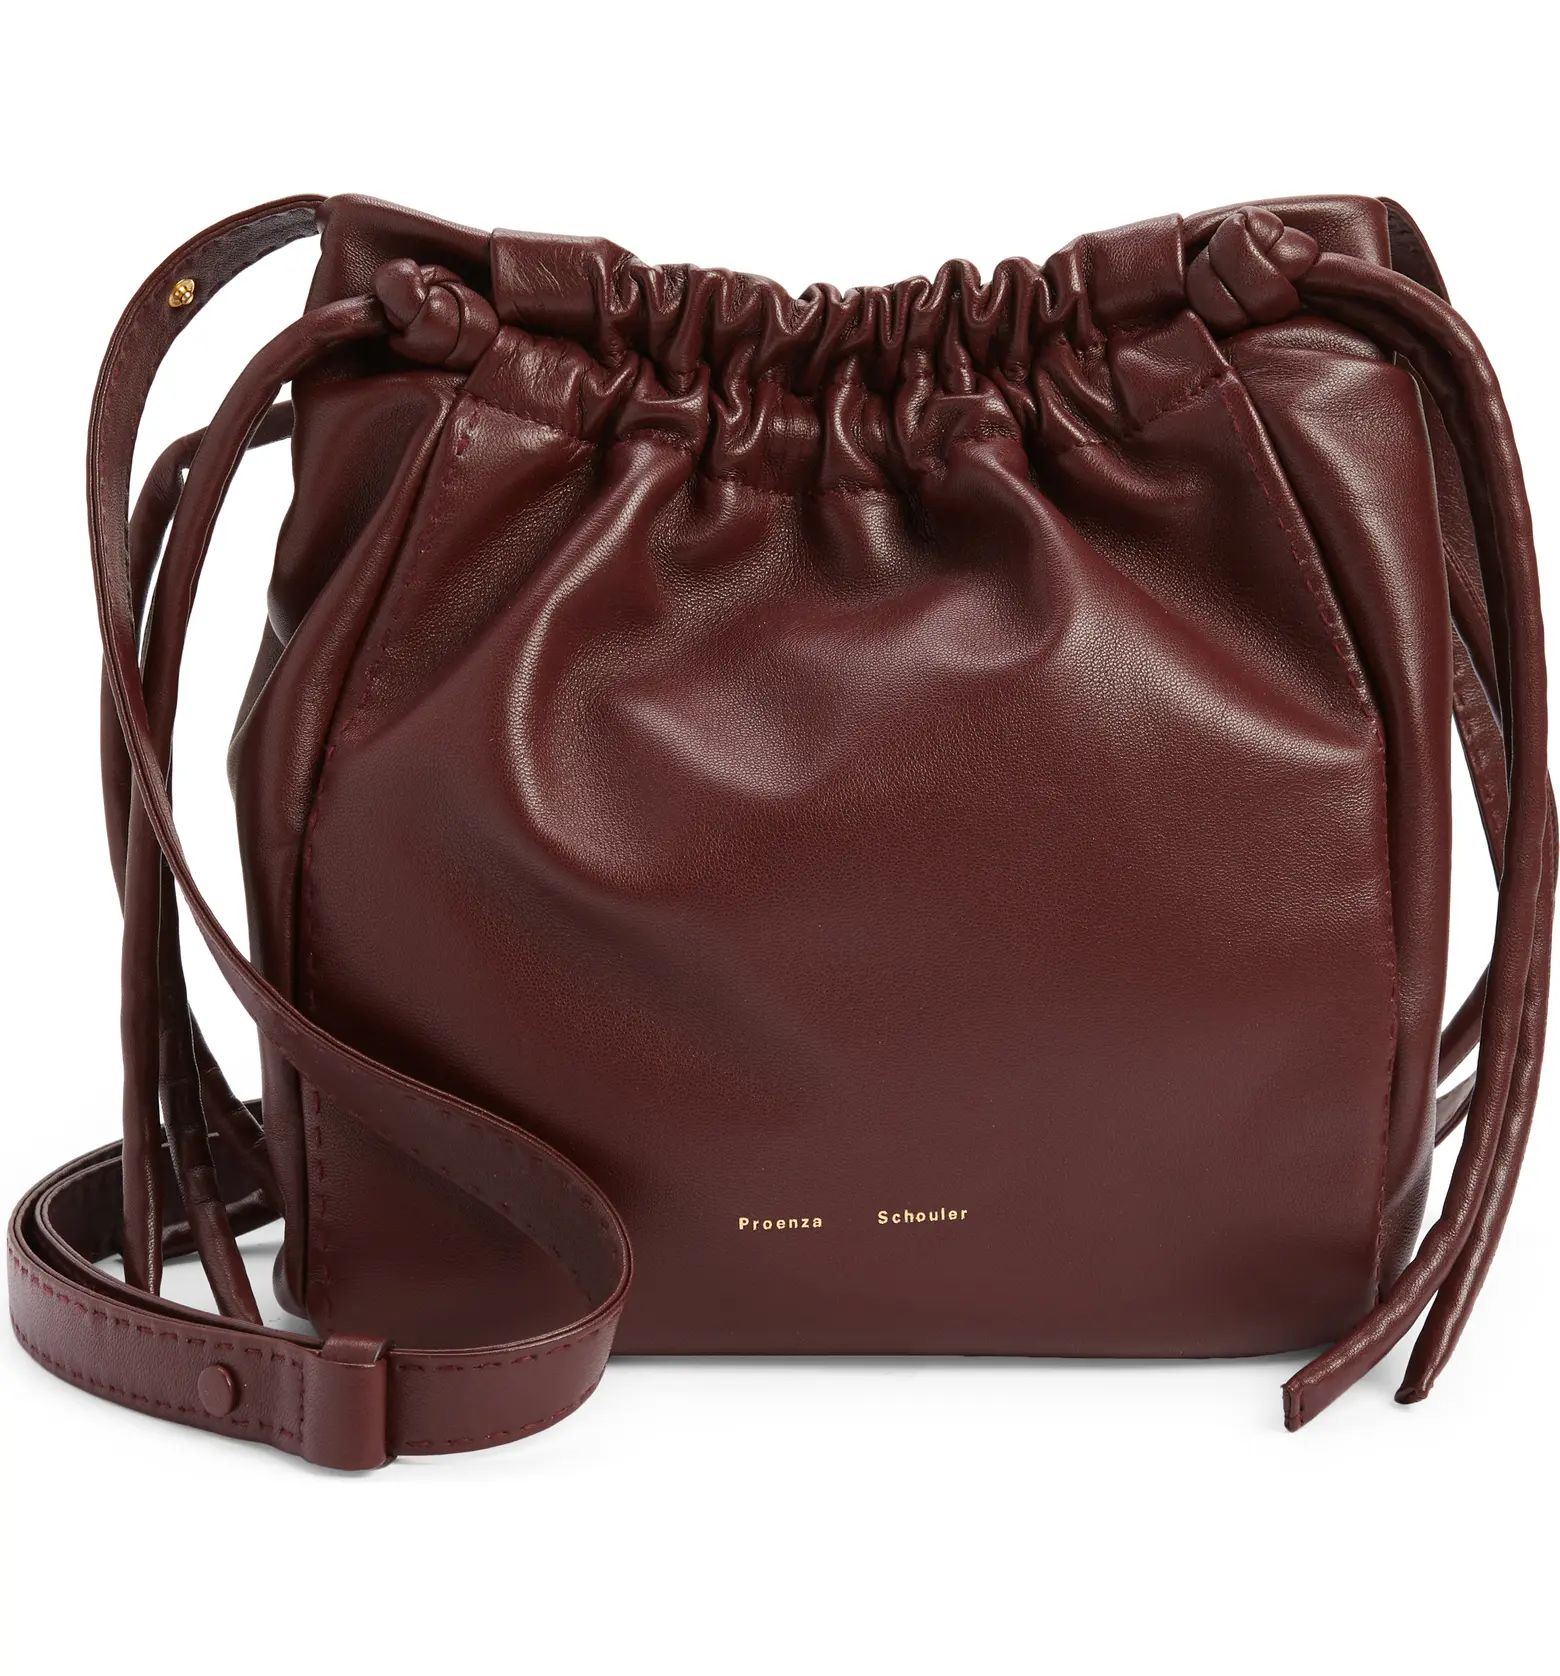 Drawsting Pouch Leather Crossbody Bag | Nordstrom